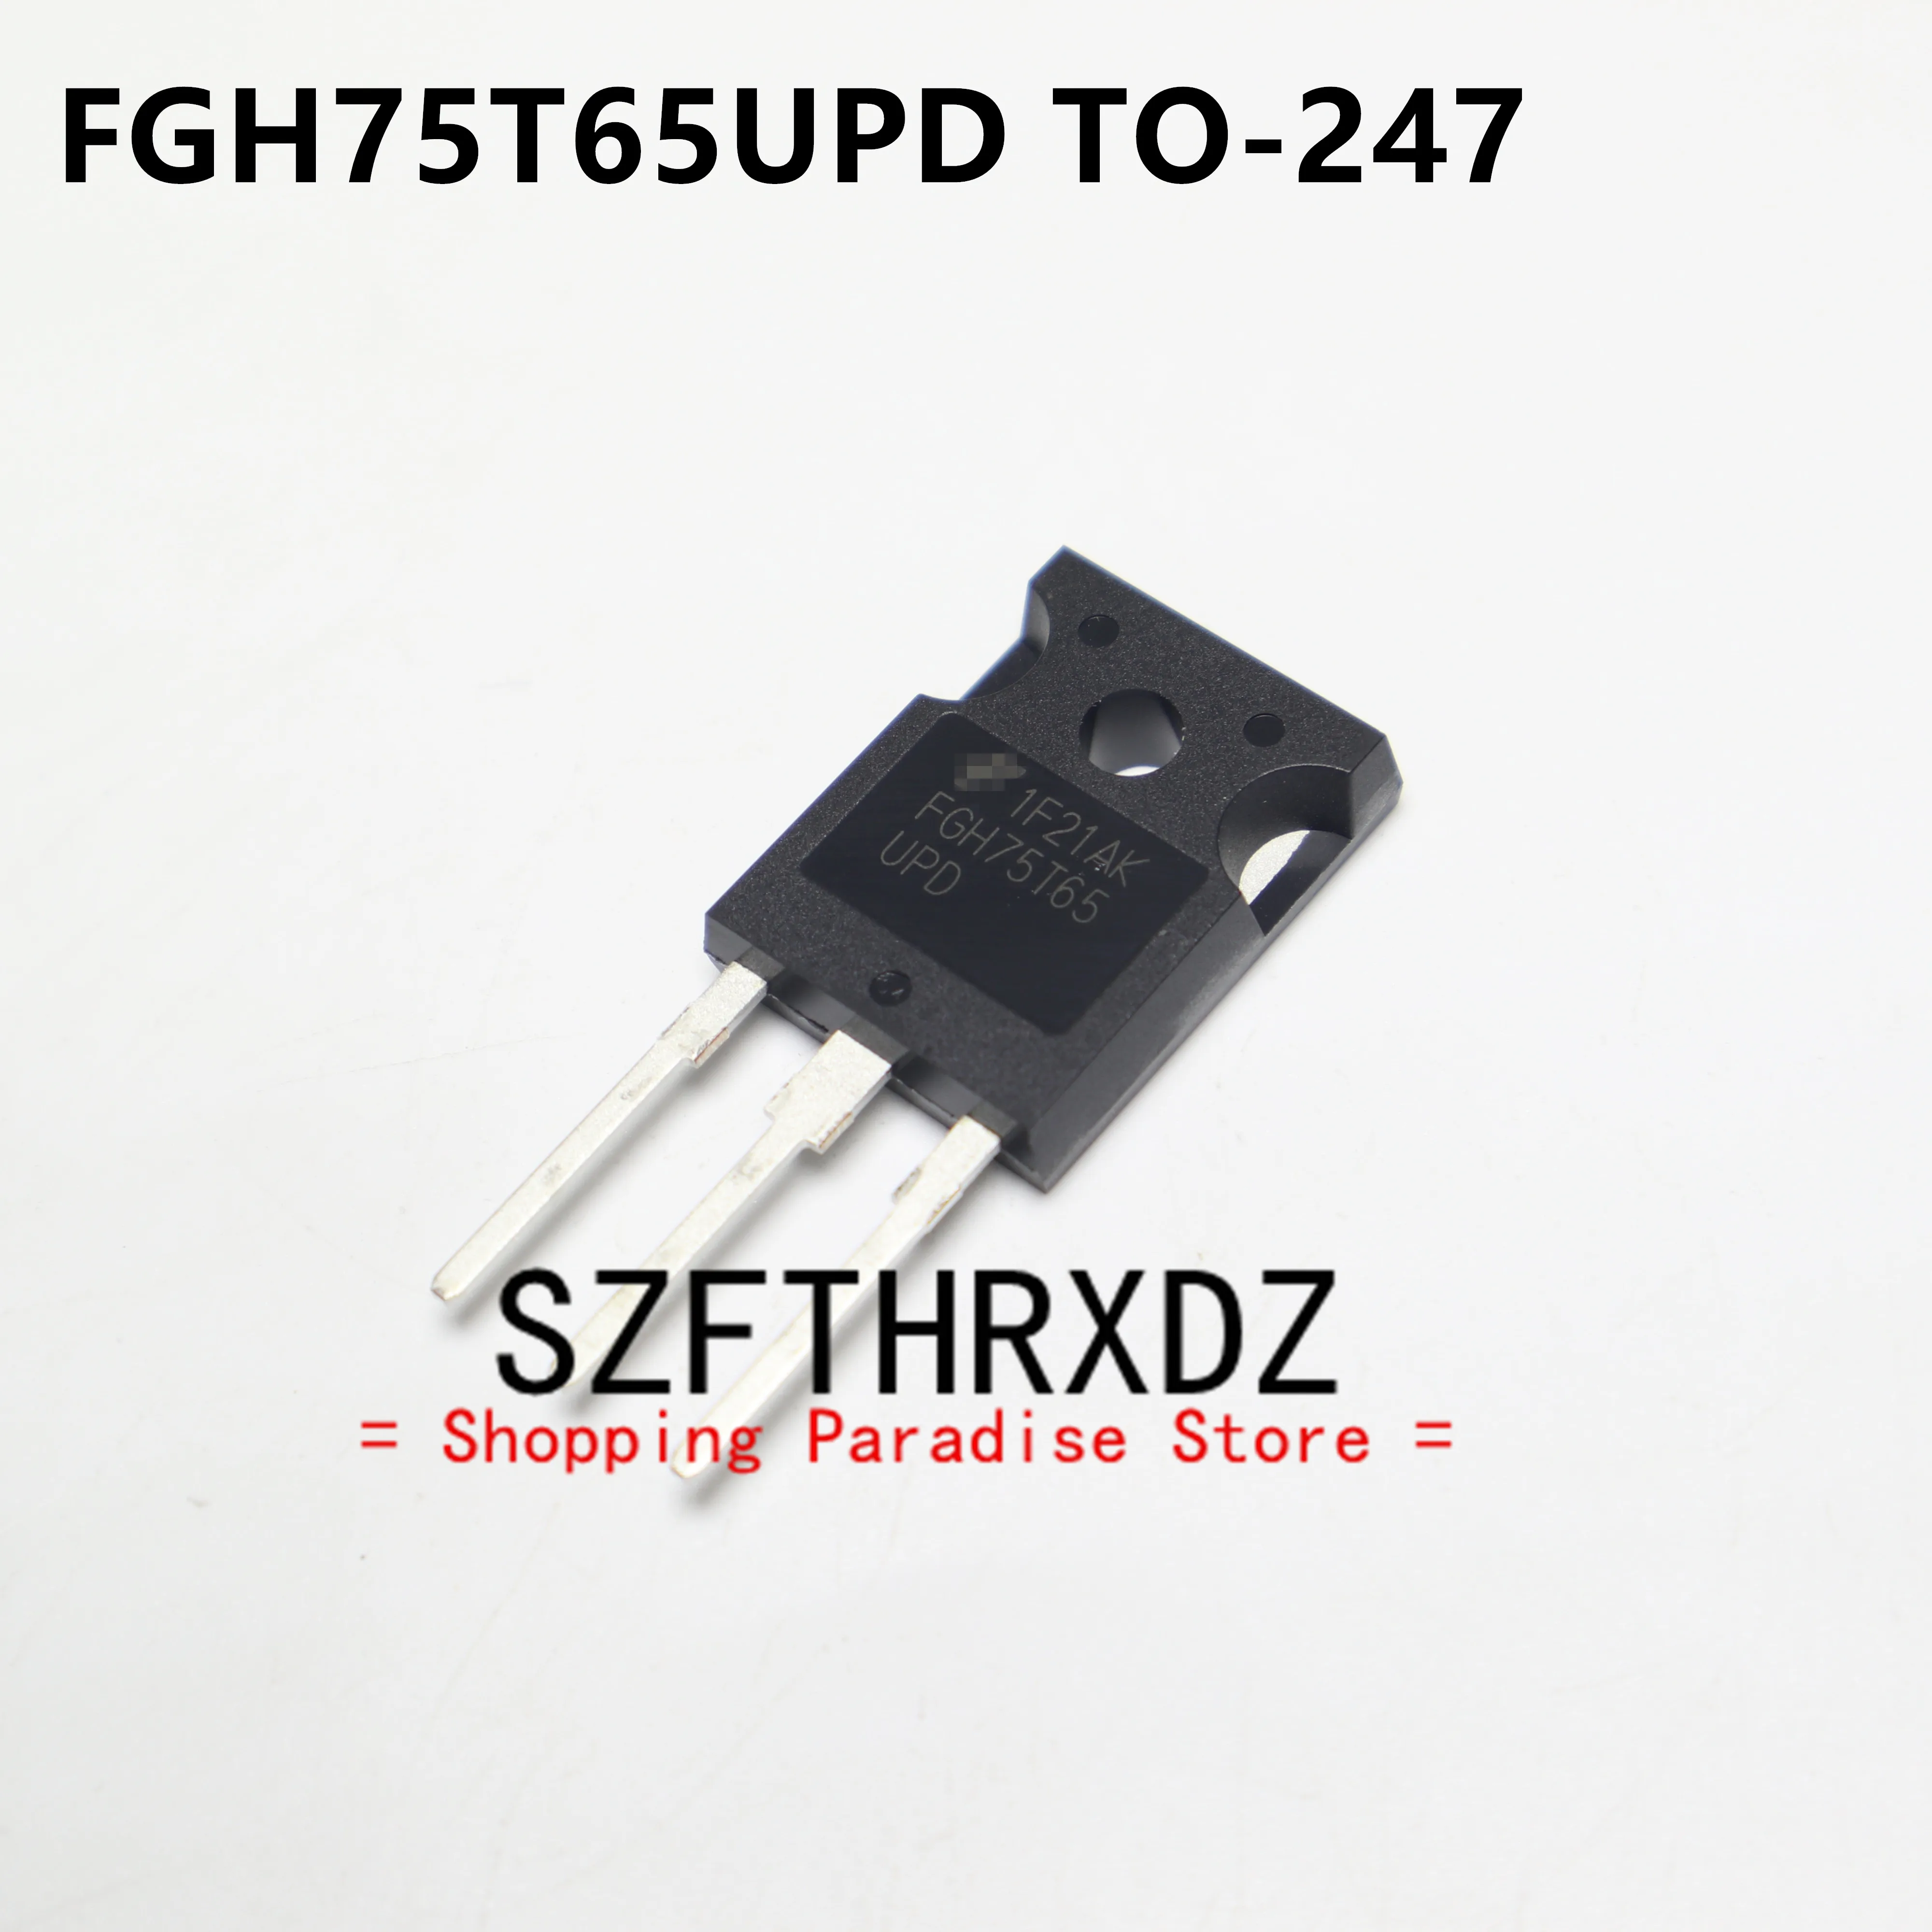 

SZFTHRXDZ 10pcs 100% new imported original FGH75T65 FGH75T65UPD TO-247 IGBT FET 75A 650V